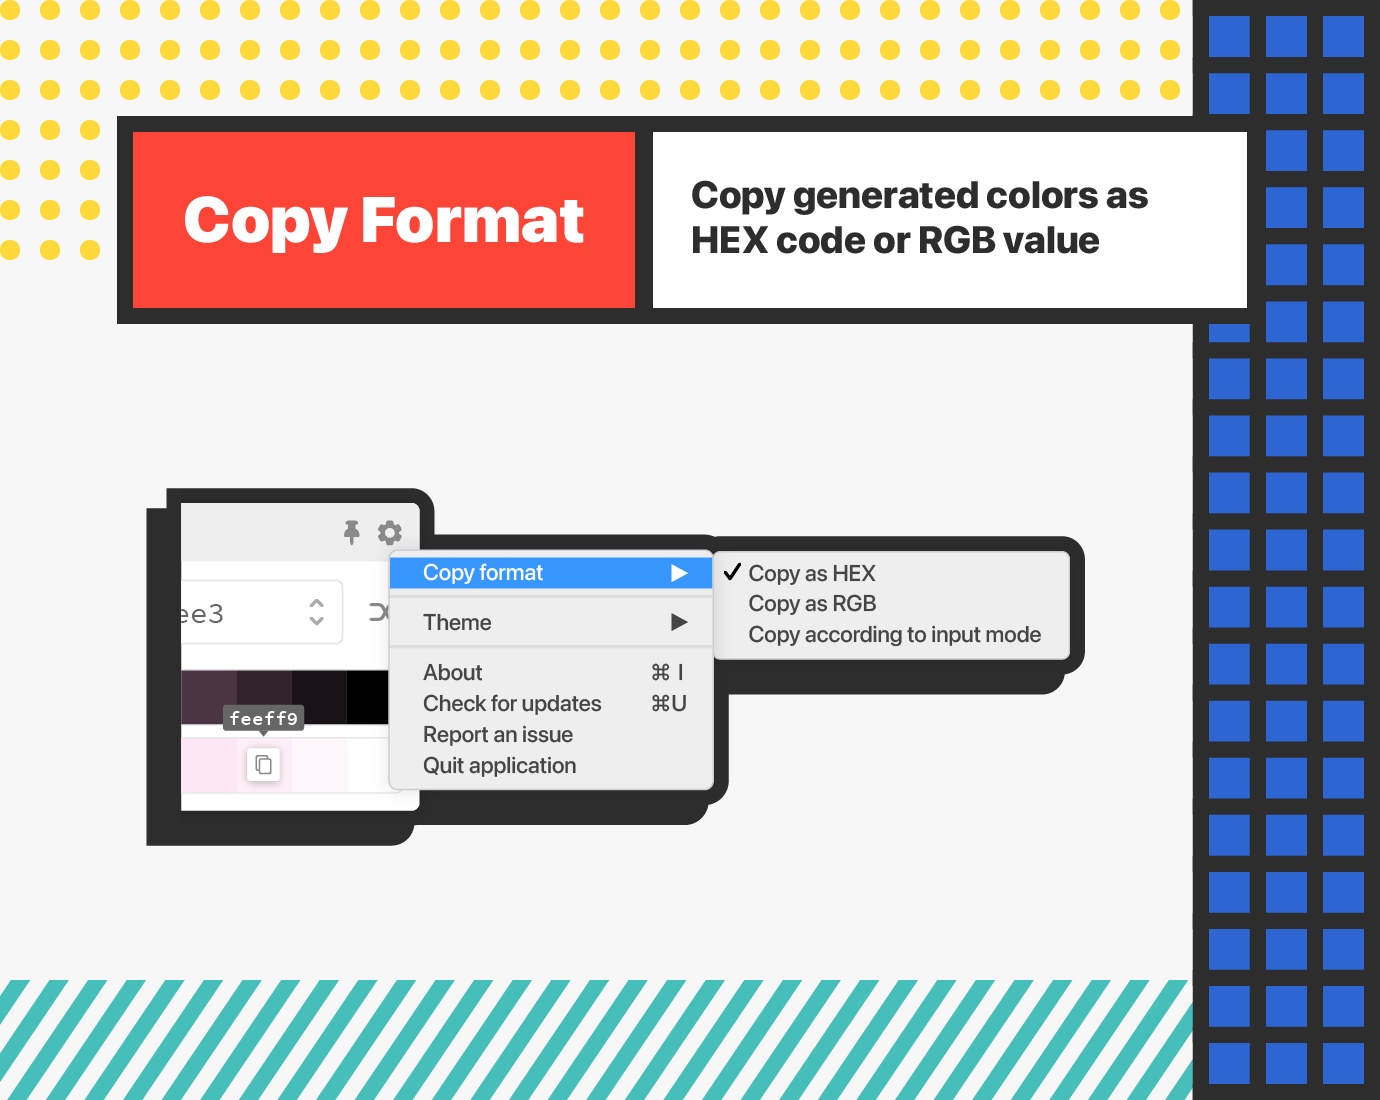 Feature 3 - Copy Format: Copy generated colors as HEX code or RGB value